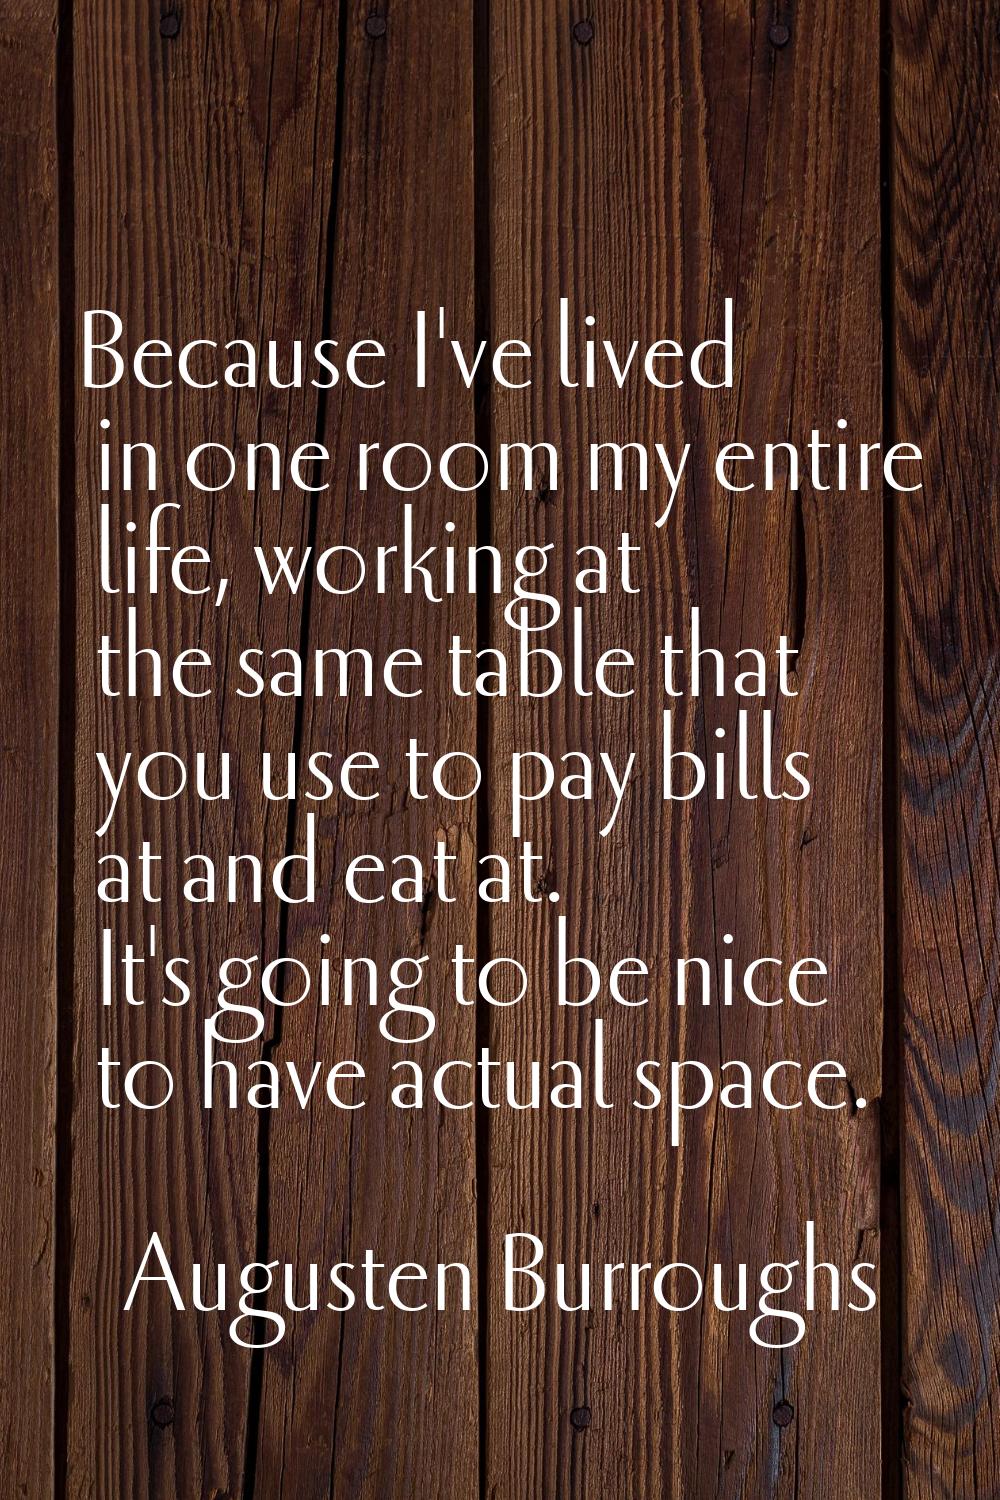 Because I've lived in one room my entire life, working at the same table that you use to pay bills 